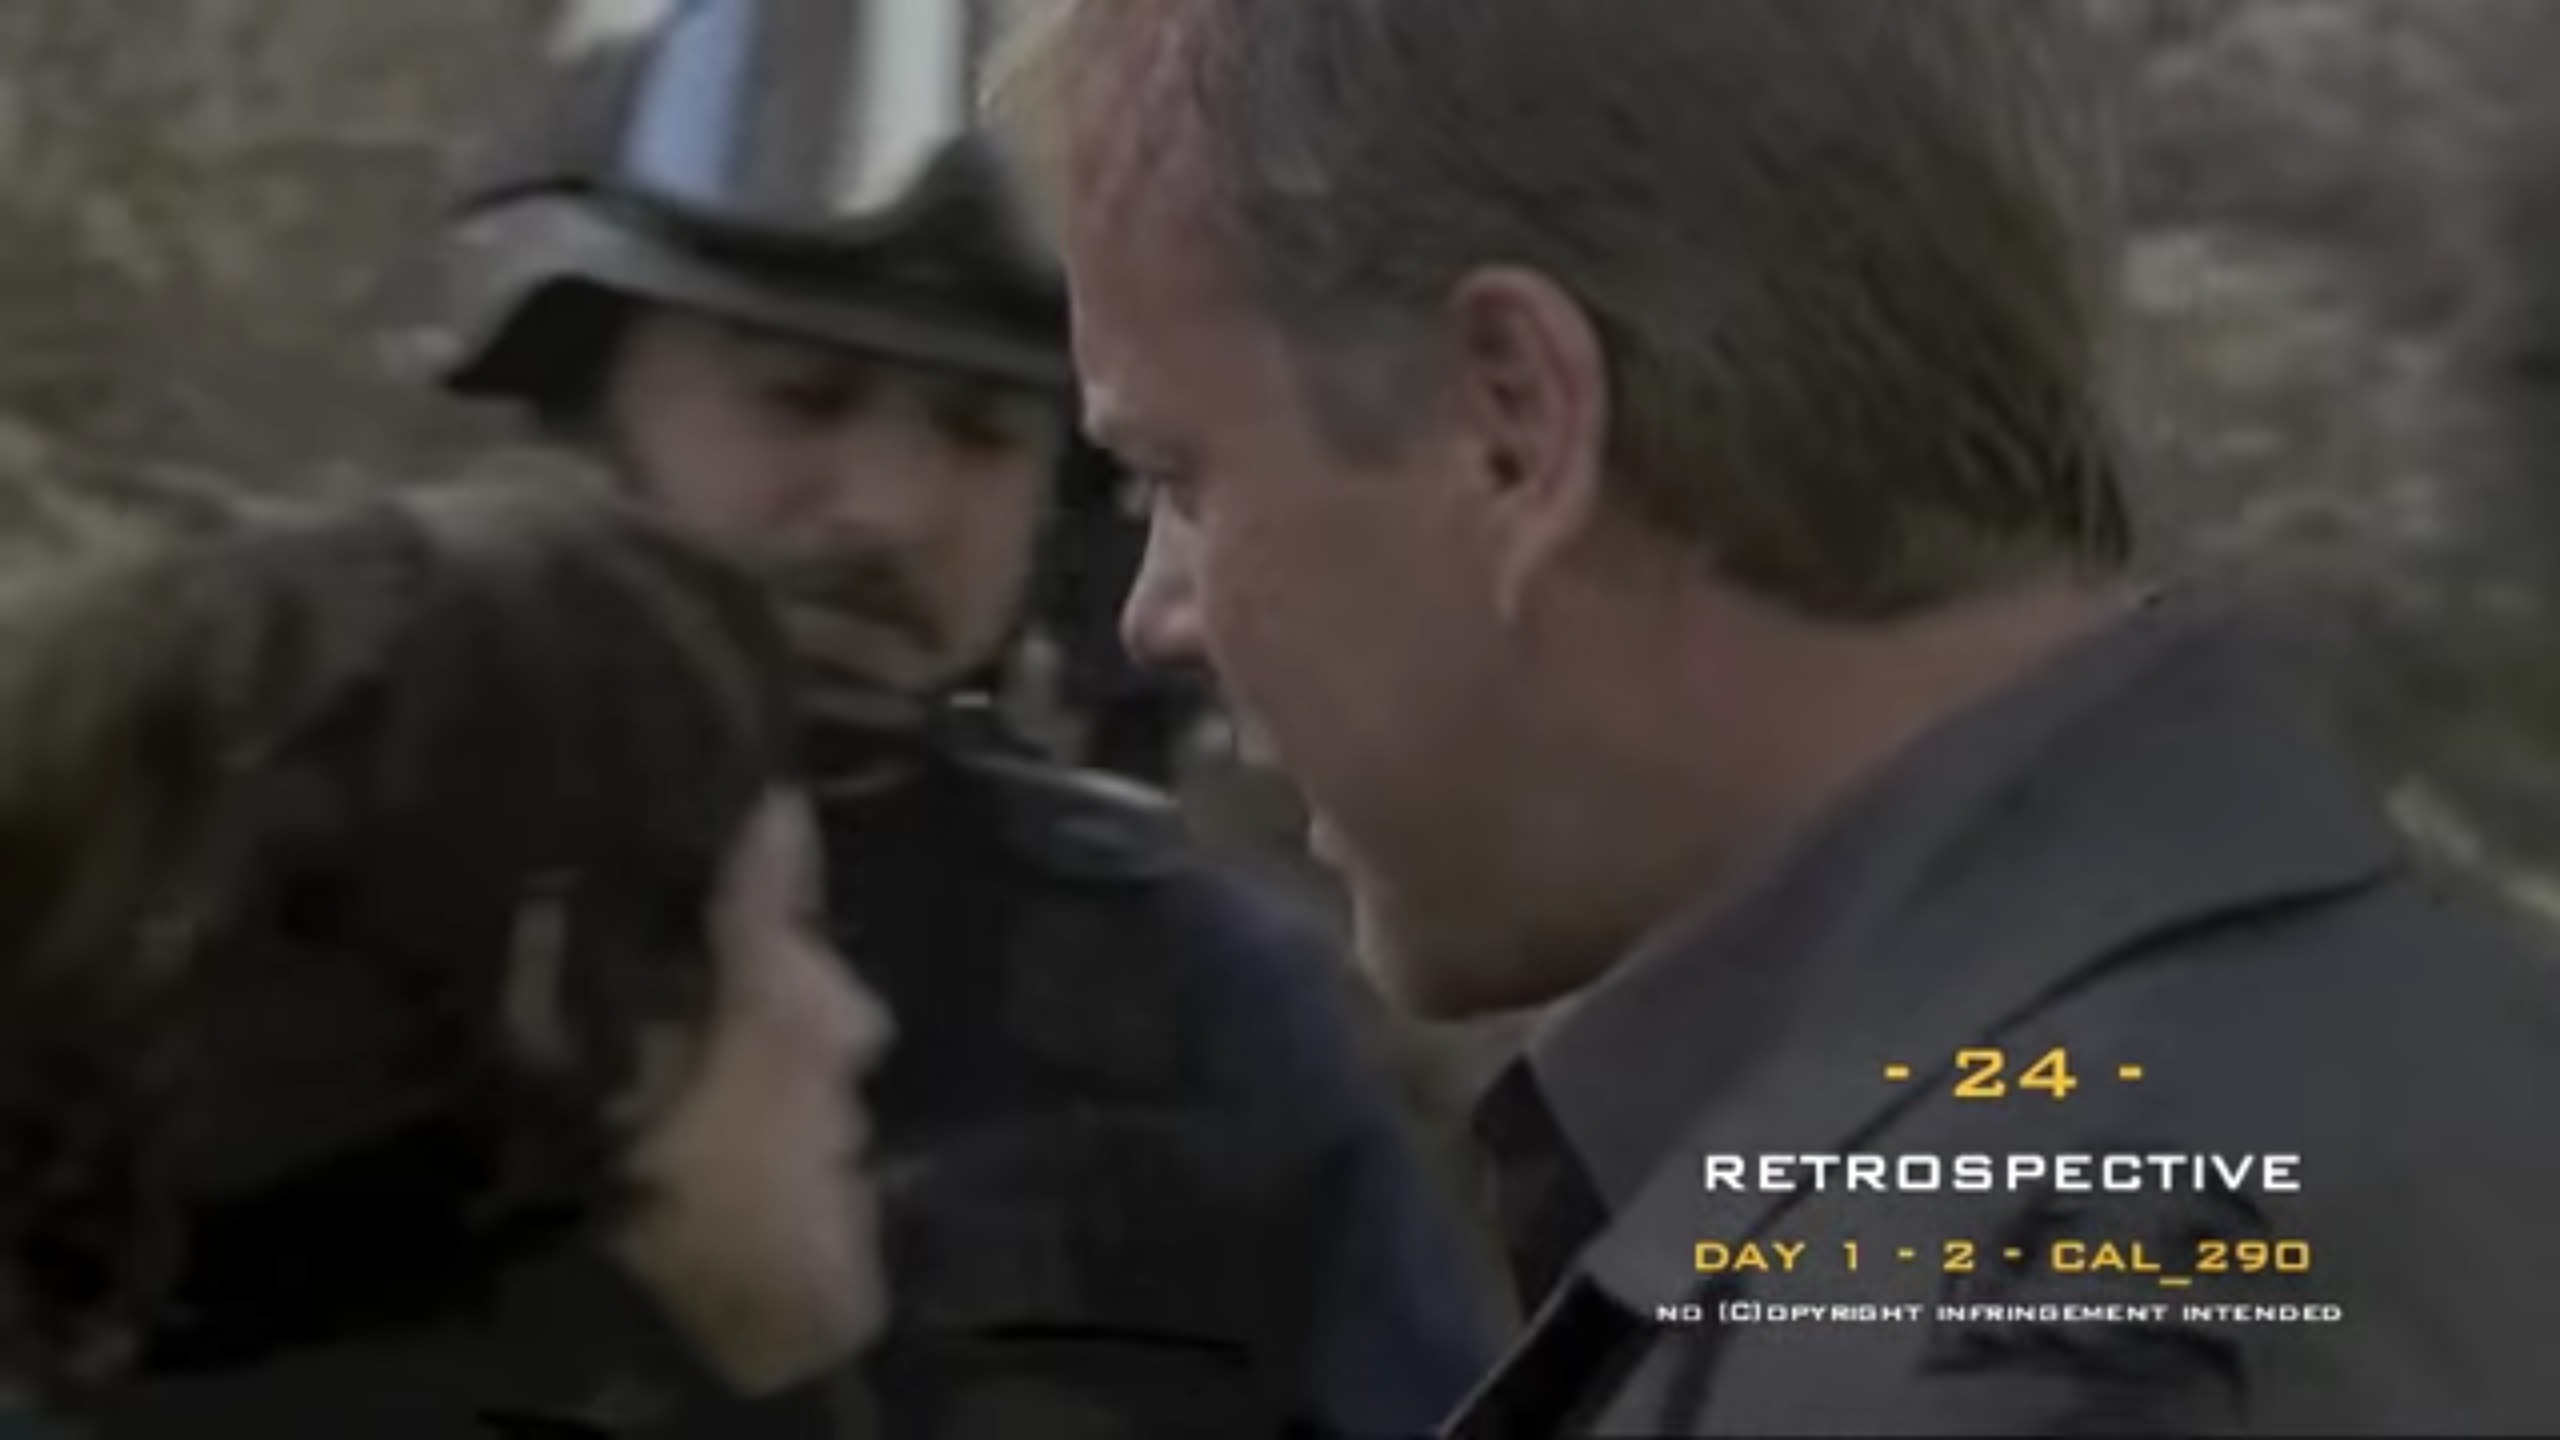 SWAT4HIRE on location shooting 24 Season 2 with Kiefer Sutherland and Sarah Clarke. SWAT Operator Fred Porras pictured. Tactical Casting provided by Patricia Homan Davila @swat4hire